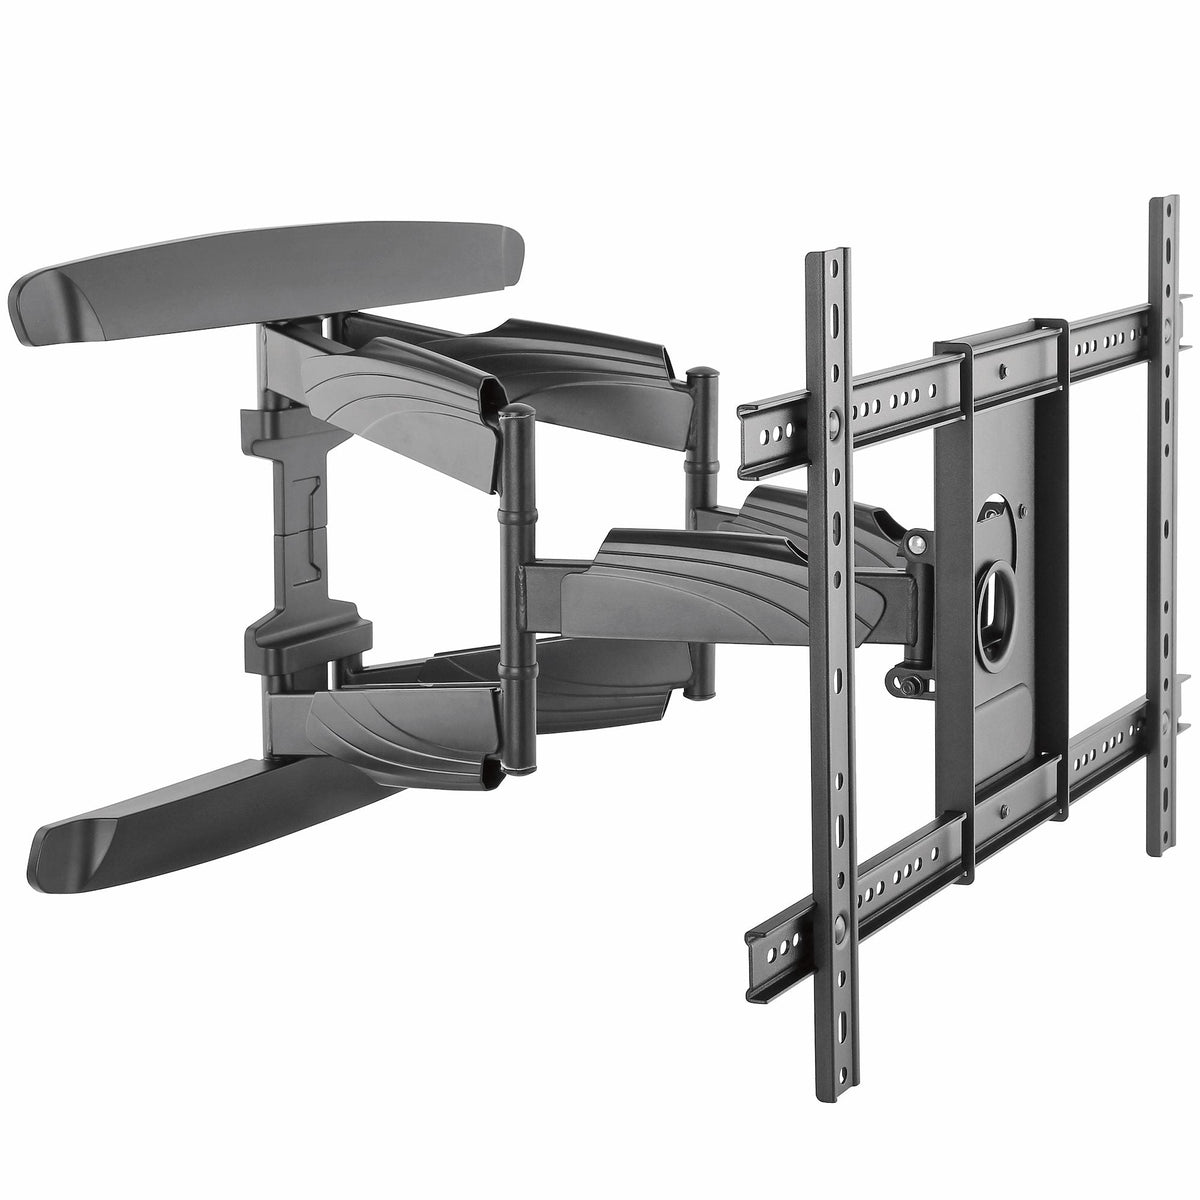 StarTech.com TV Wall Mount supports up to 70 inch VESA Displays - Low Profile Full Motion Universal TV Flat Screen Wall Mount - Heavy Duty Adjustable Tilt/Swivel Articulating Arm Bracket